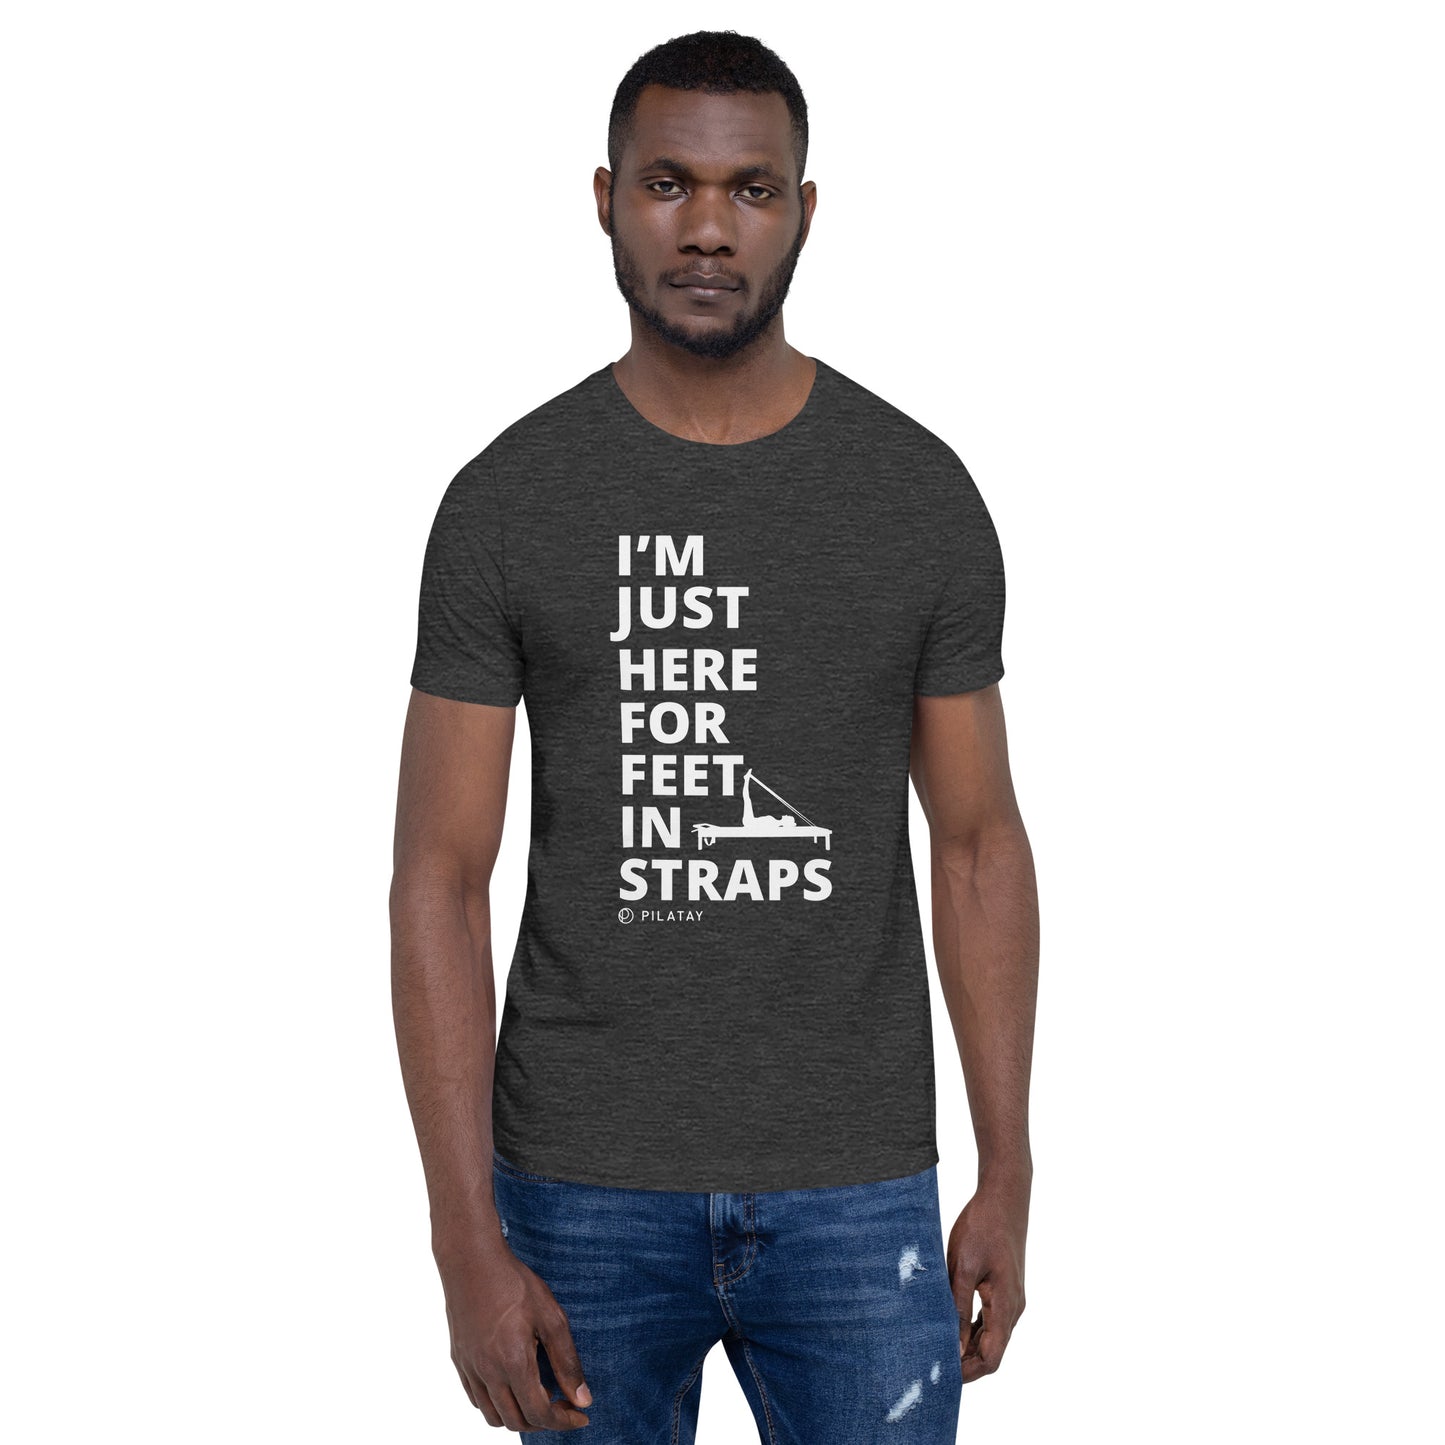 I'm Just Here For Feet In Straps - Unisex Pilates Tee